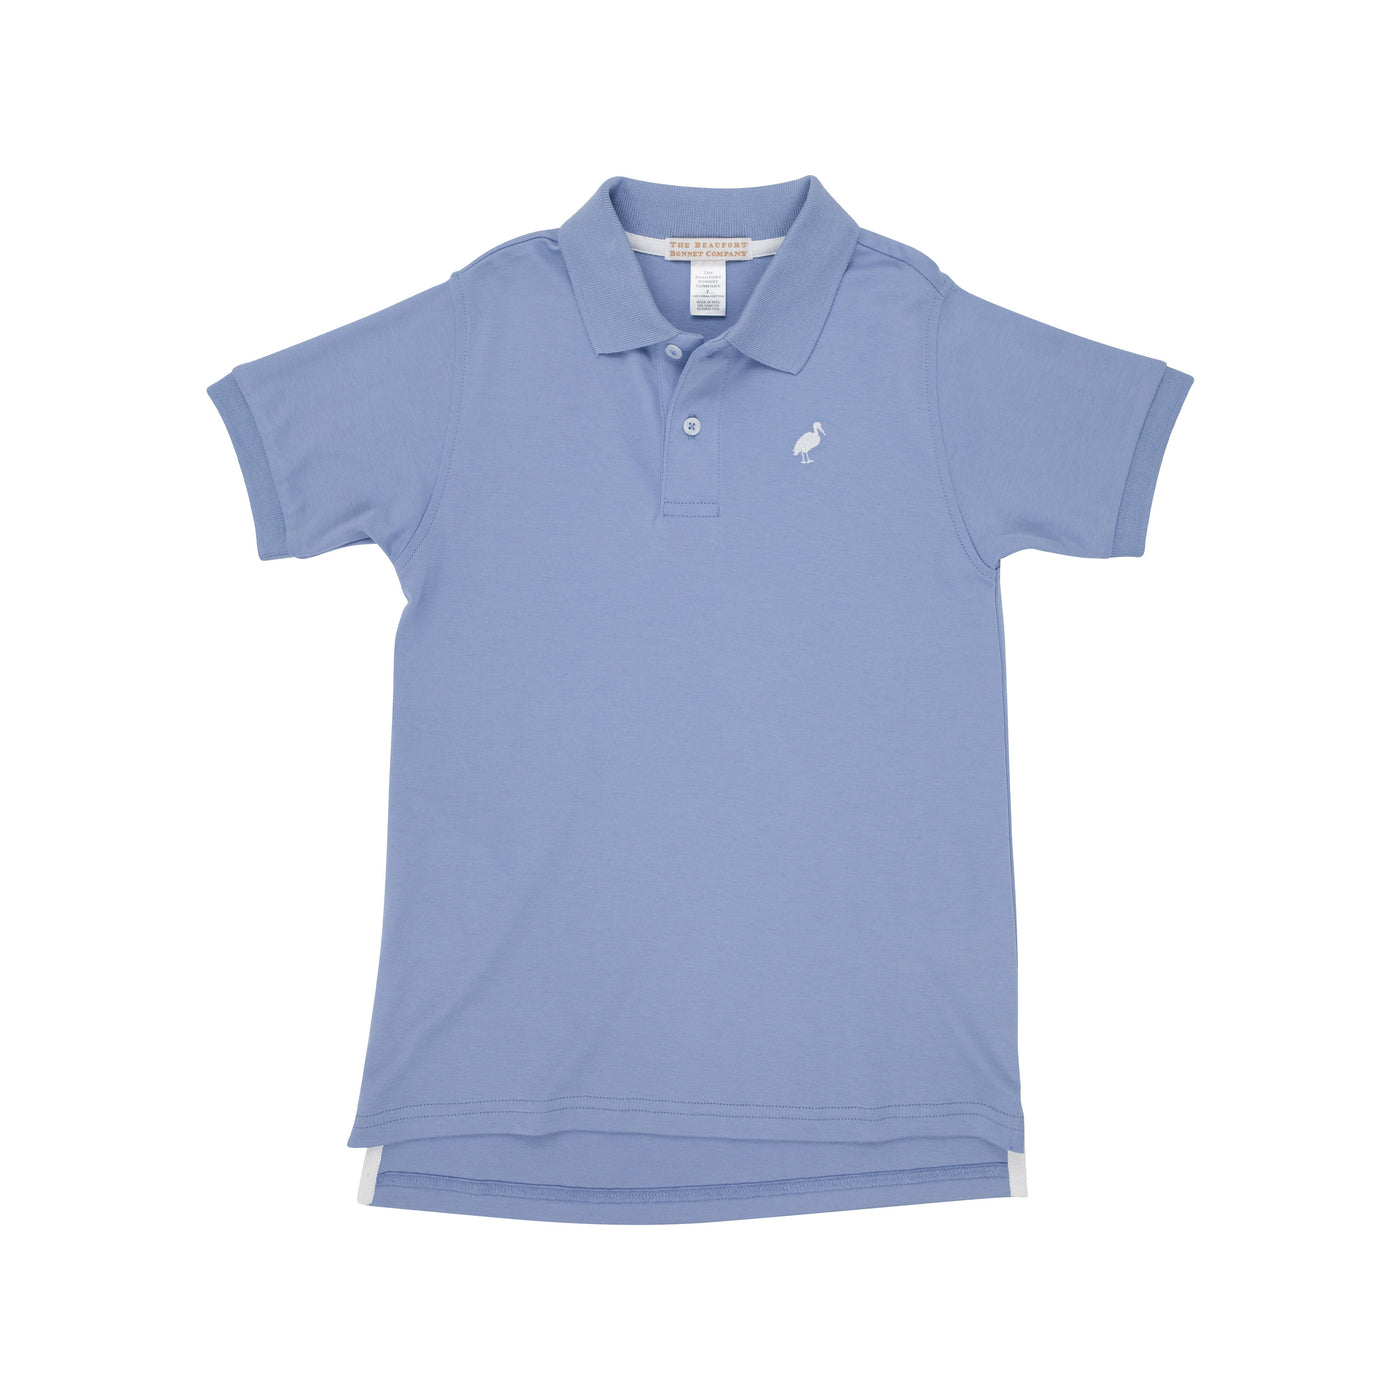 Prim and Proper Polo in Periwinkle and White